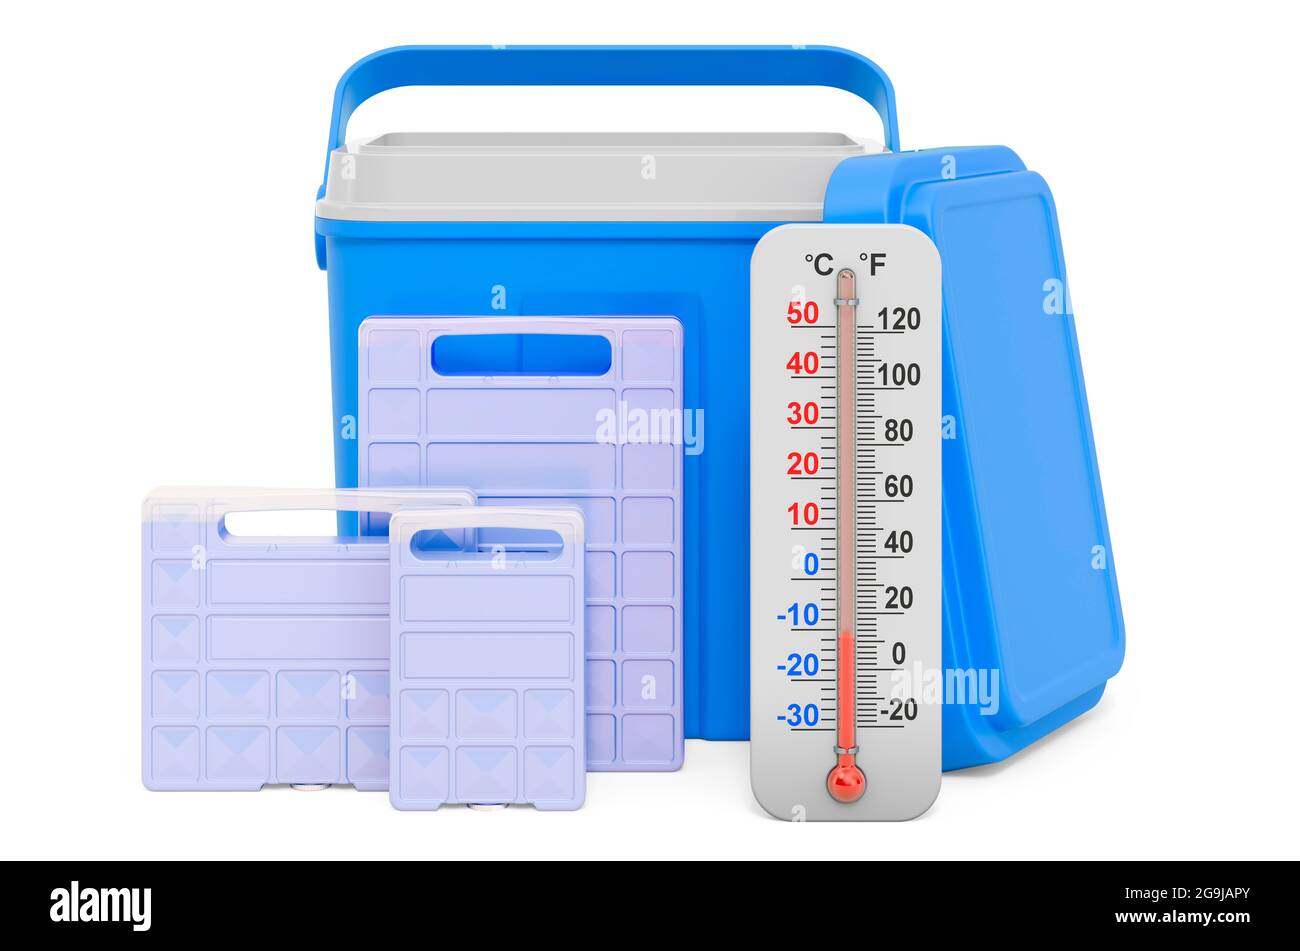 Portable ice chest with thermometer, 3D rendering isolated on white background Stock Photo